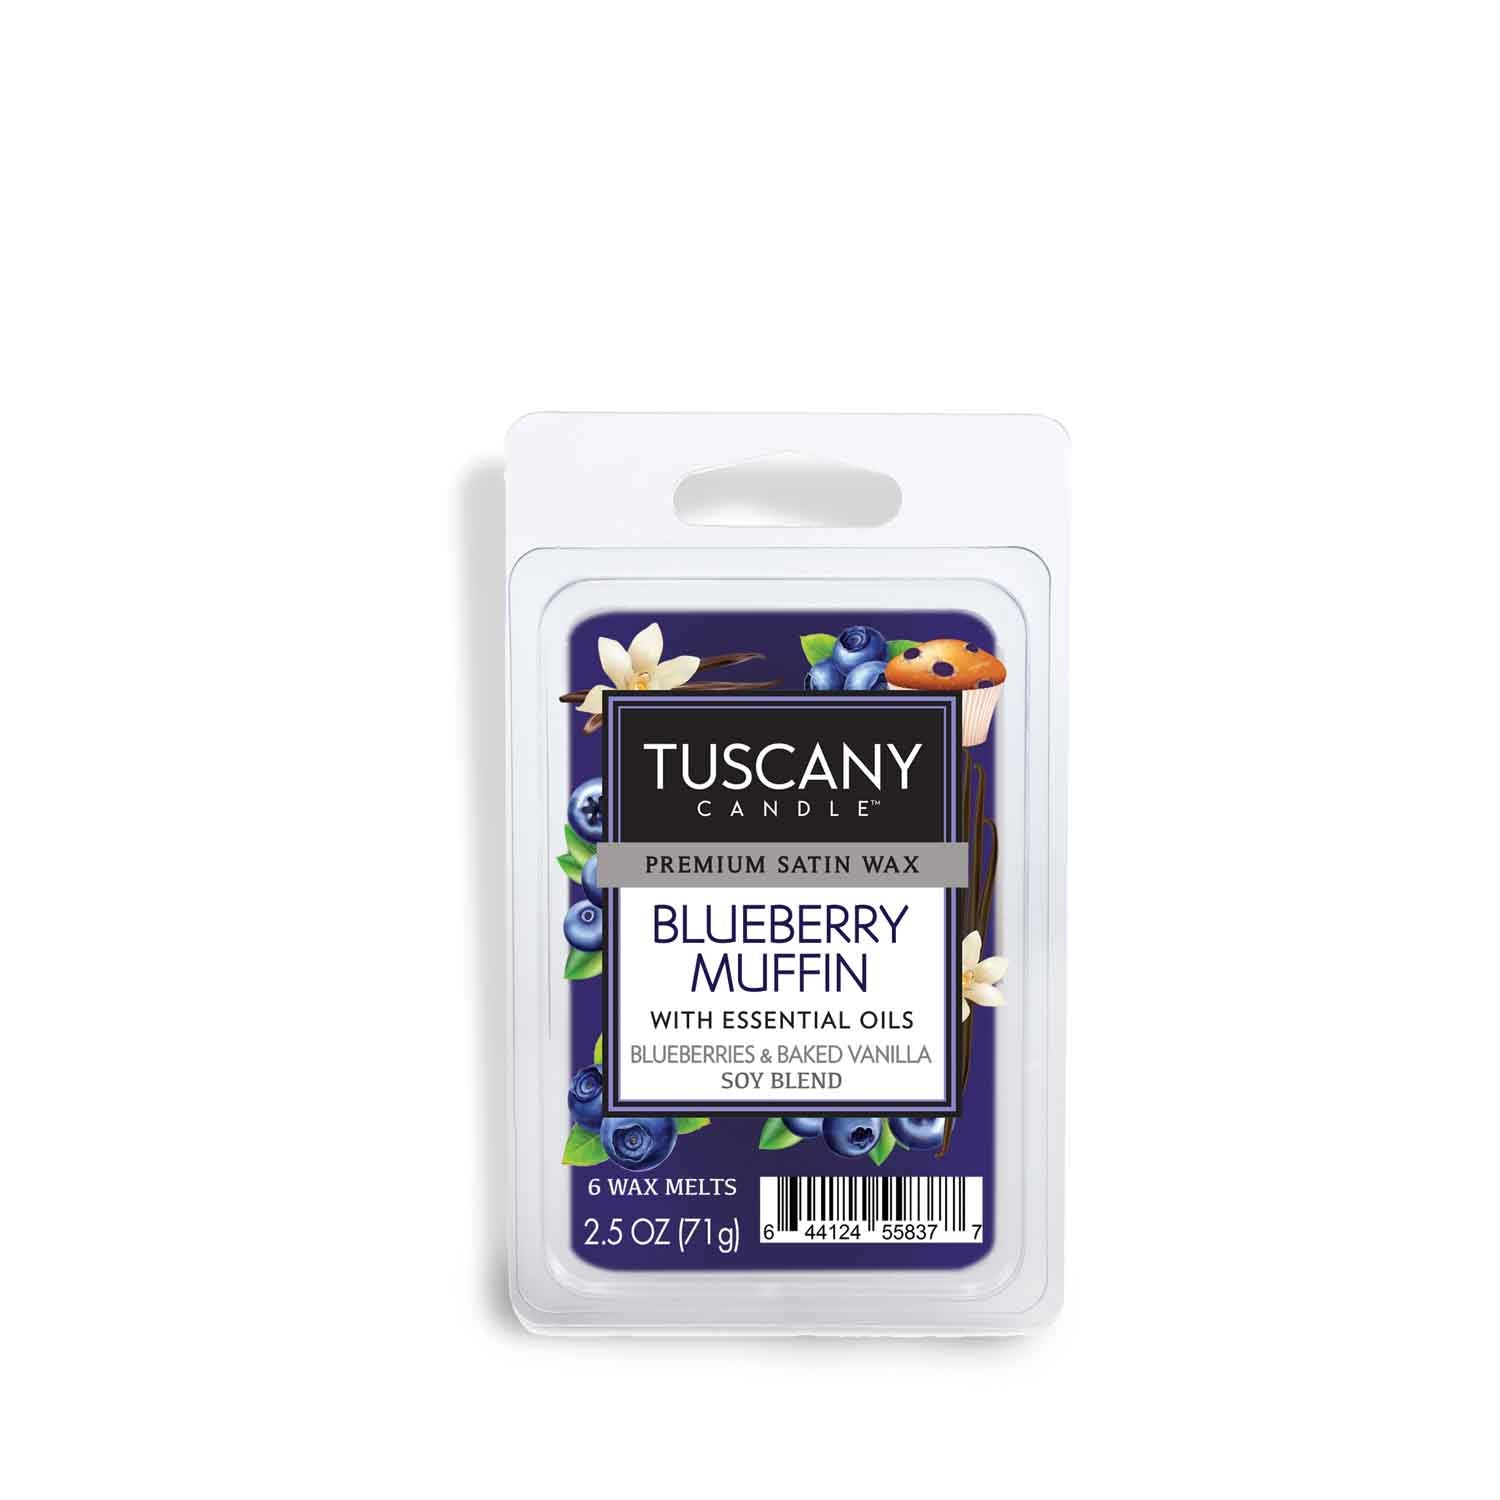 Tuscany Candle® Blueberry Muffin Scented Wax Melt (2.5 oz) tart bars.